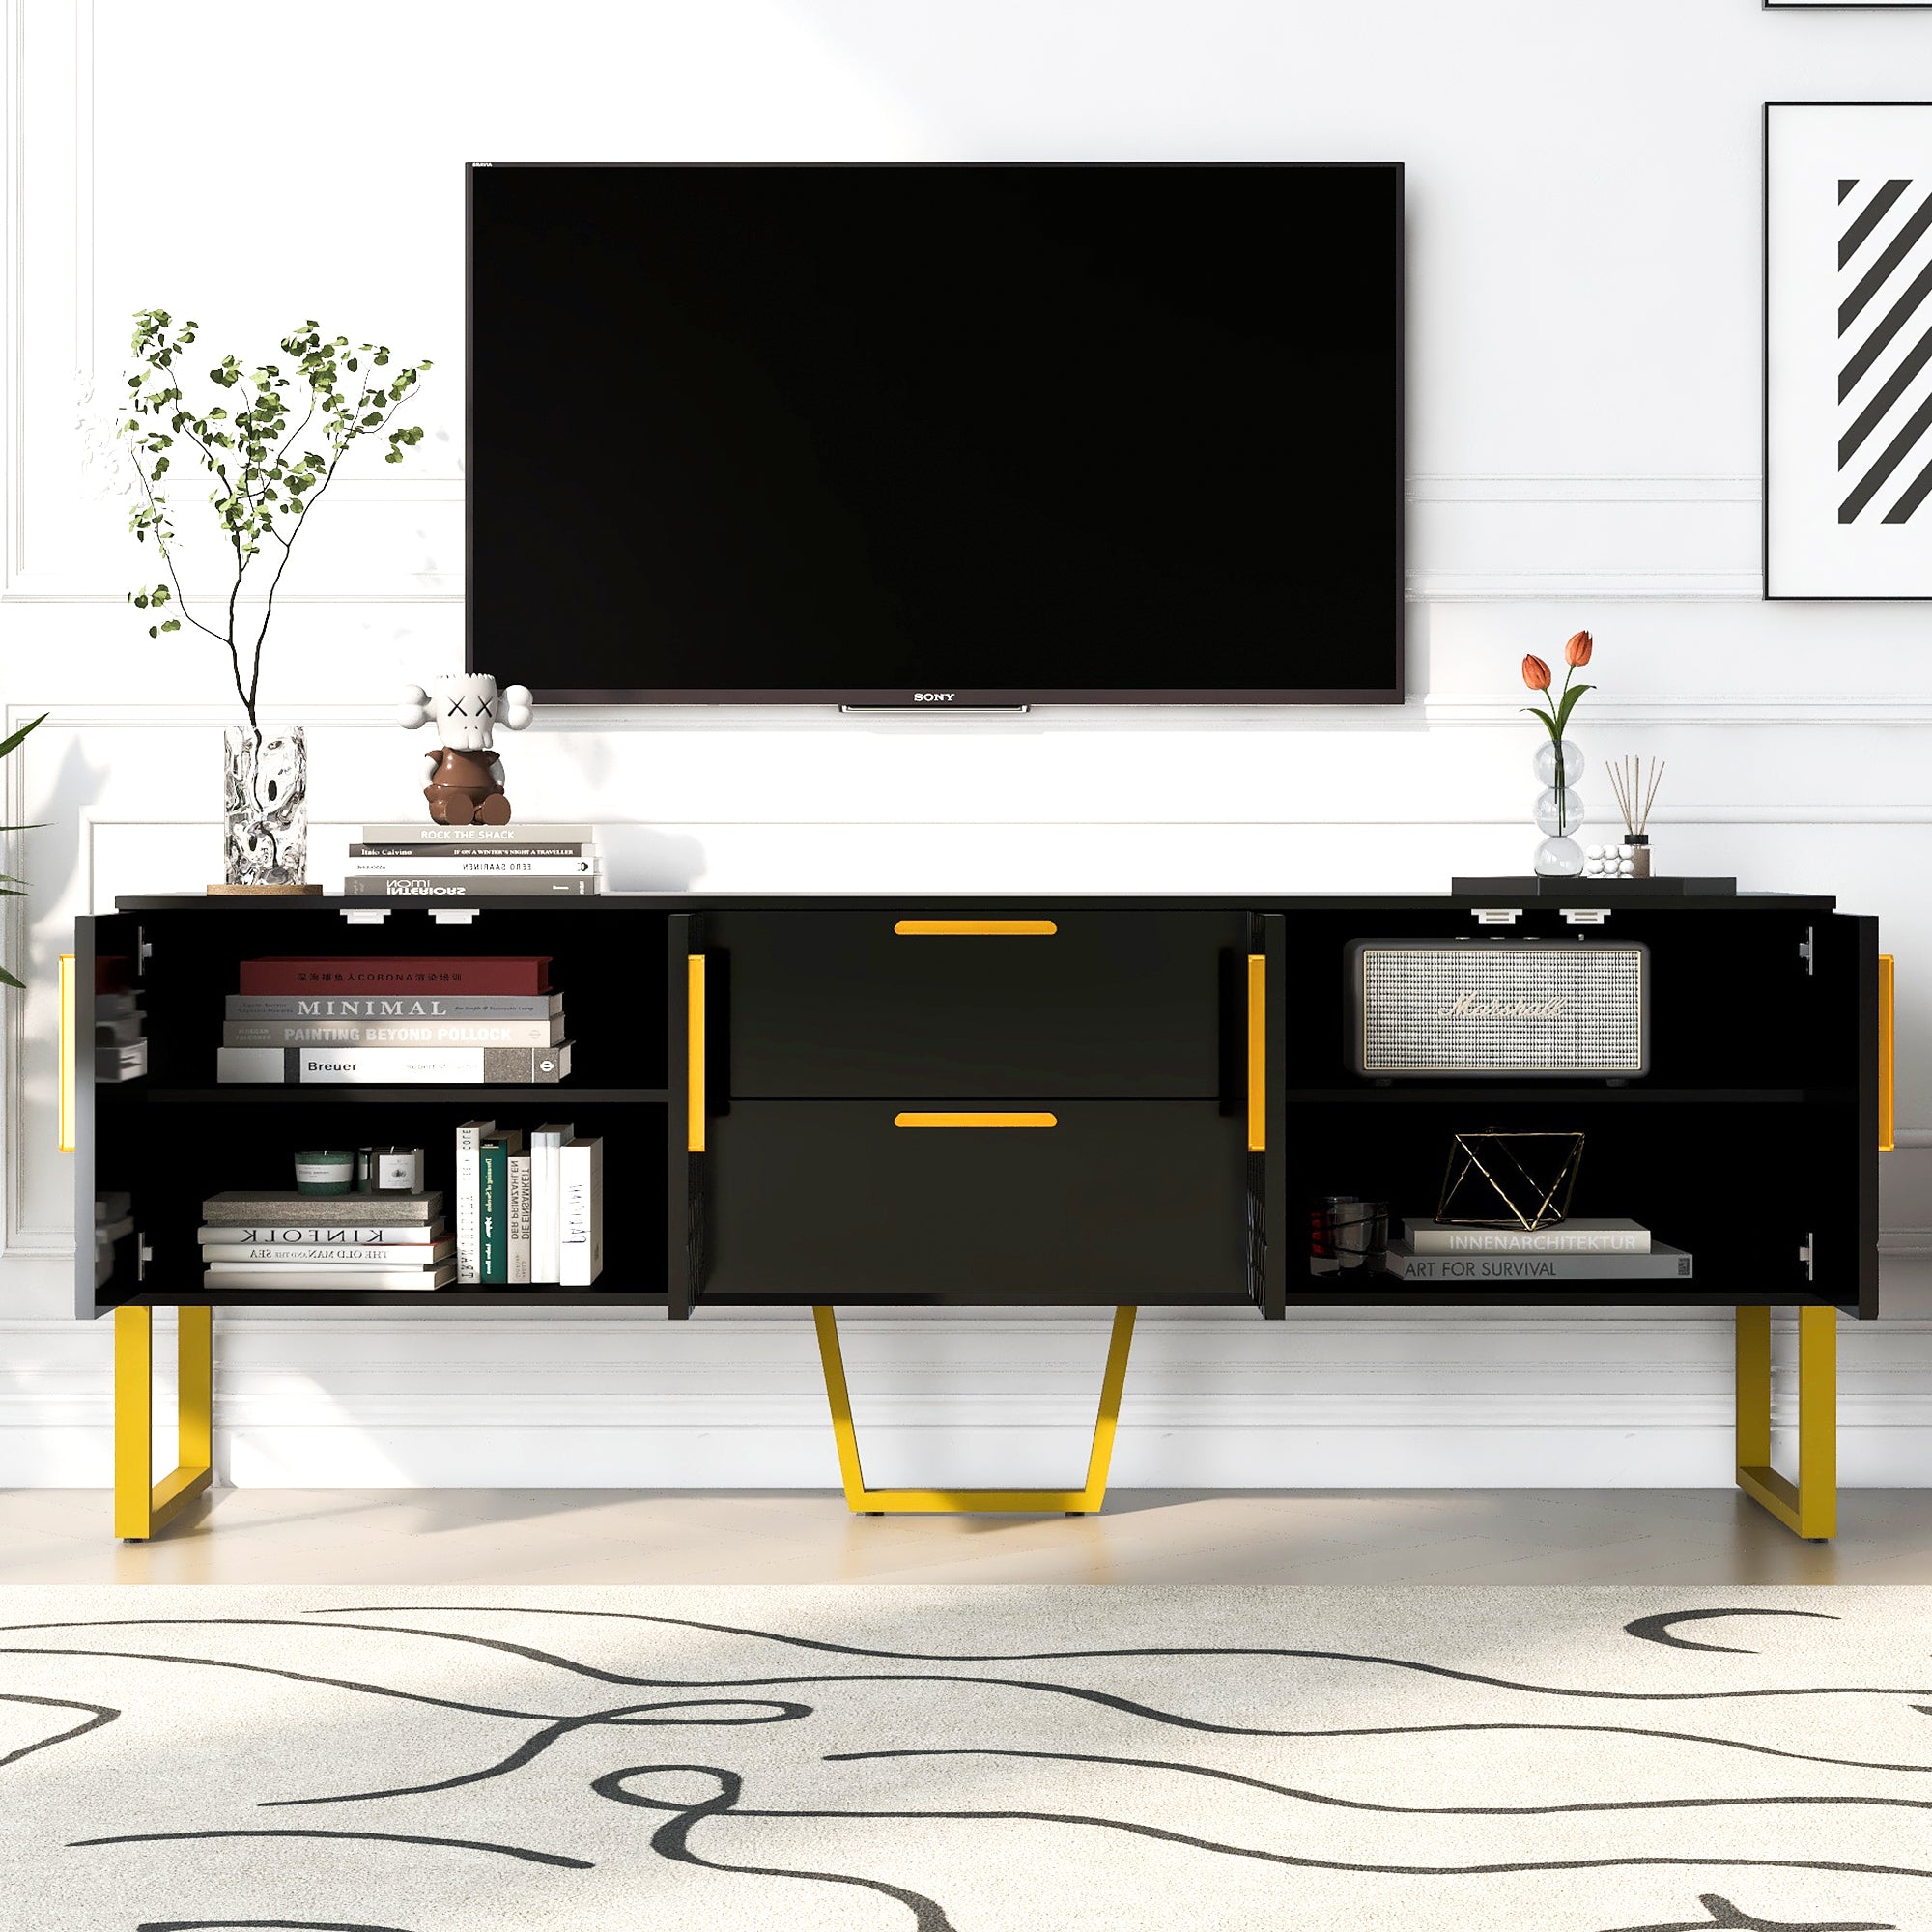 U Can Modern TV Stand for TVs up to 75 Inches, Storage